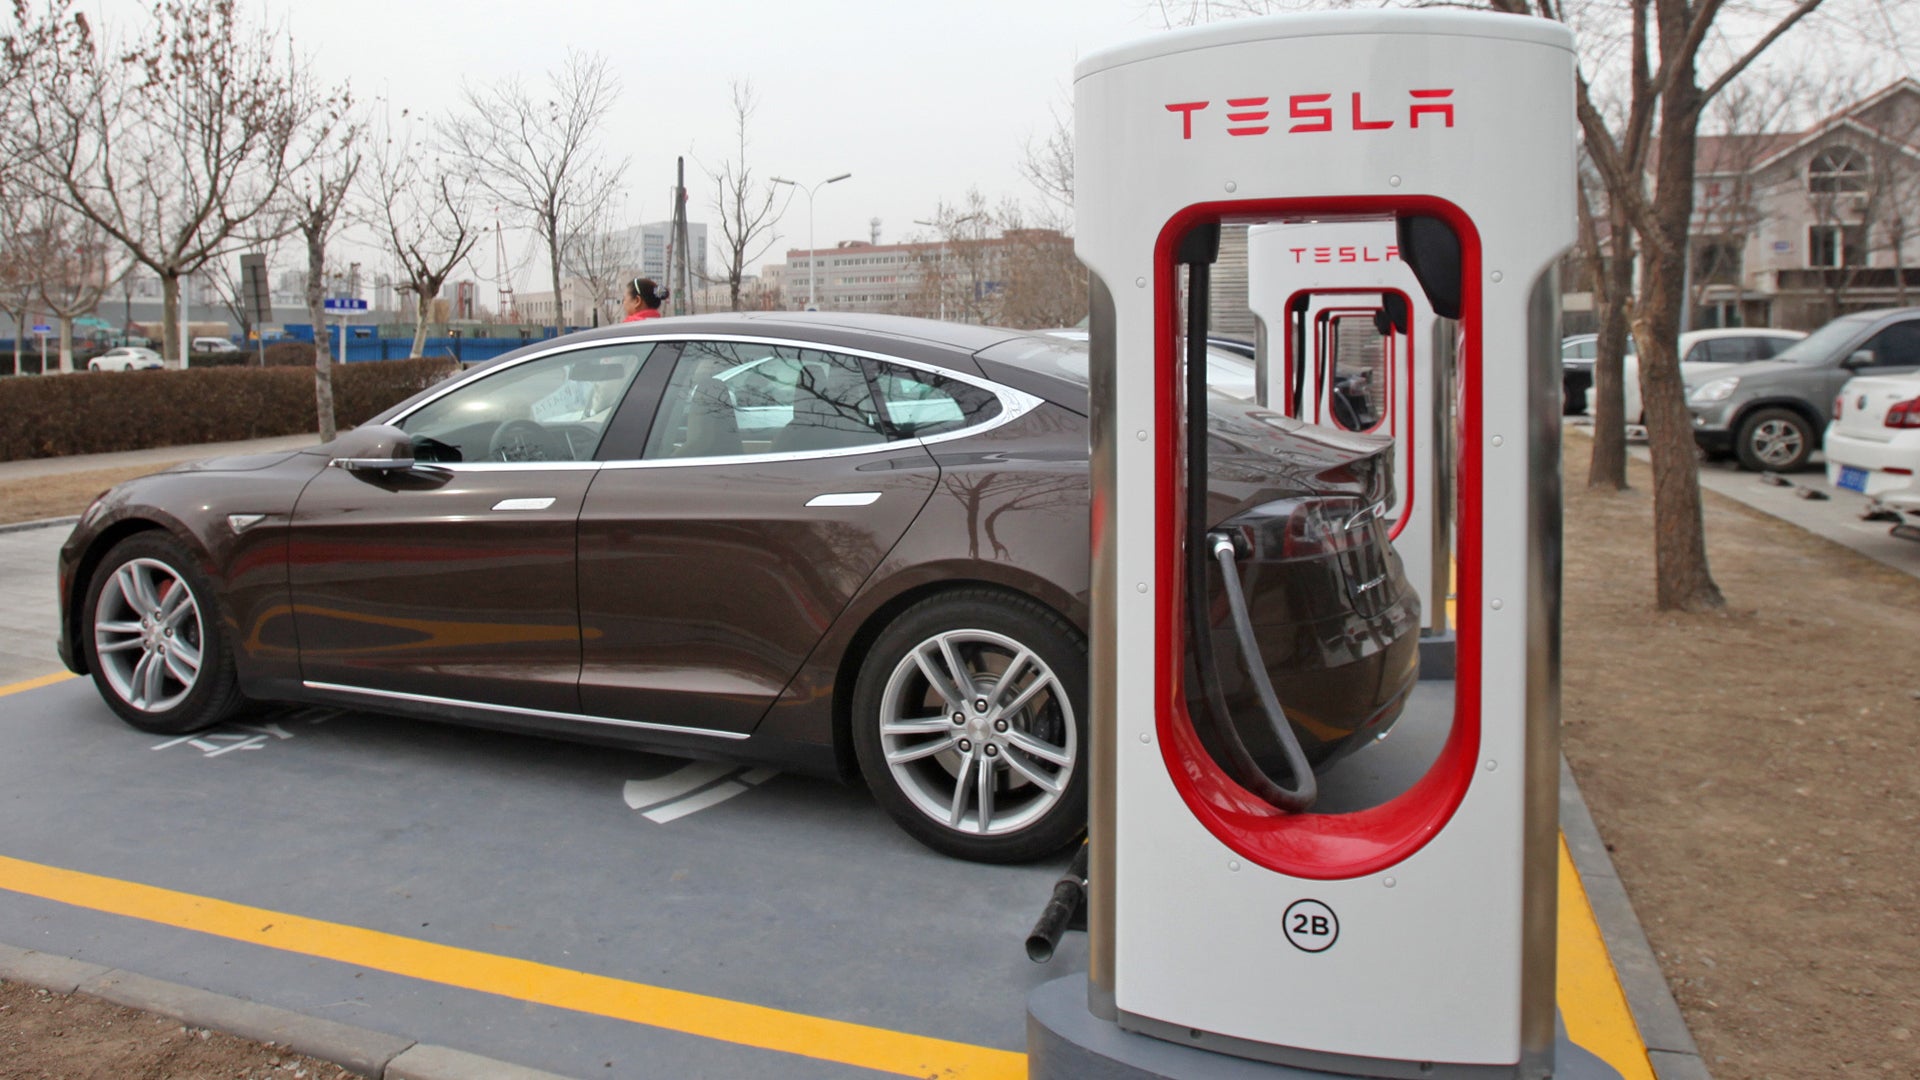 Tesla Supercharger V3: Everything You Need to Know About the New, Ultra-Fast EV Charger